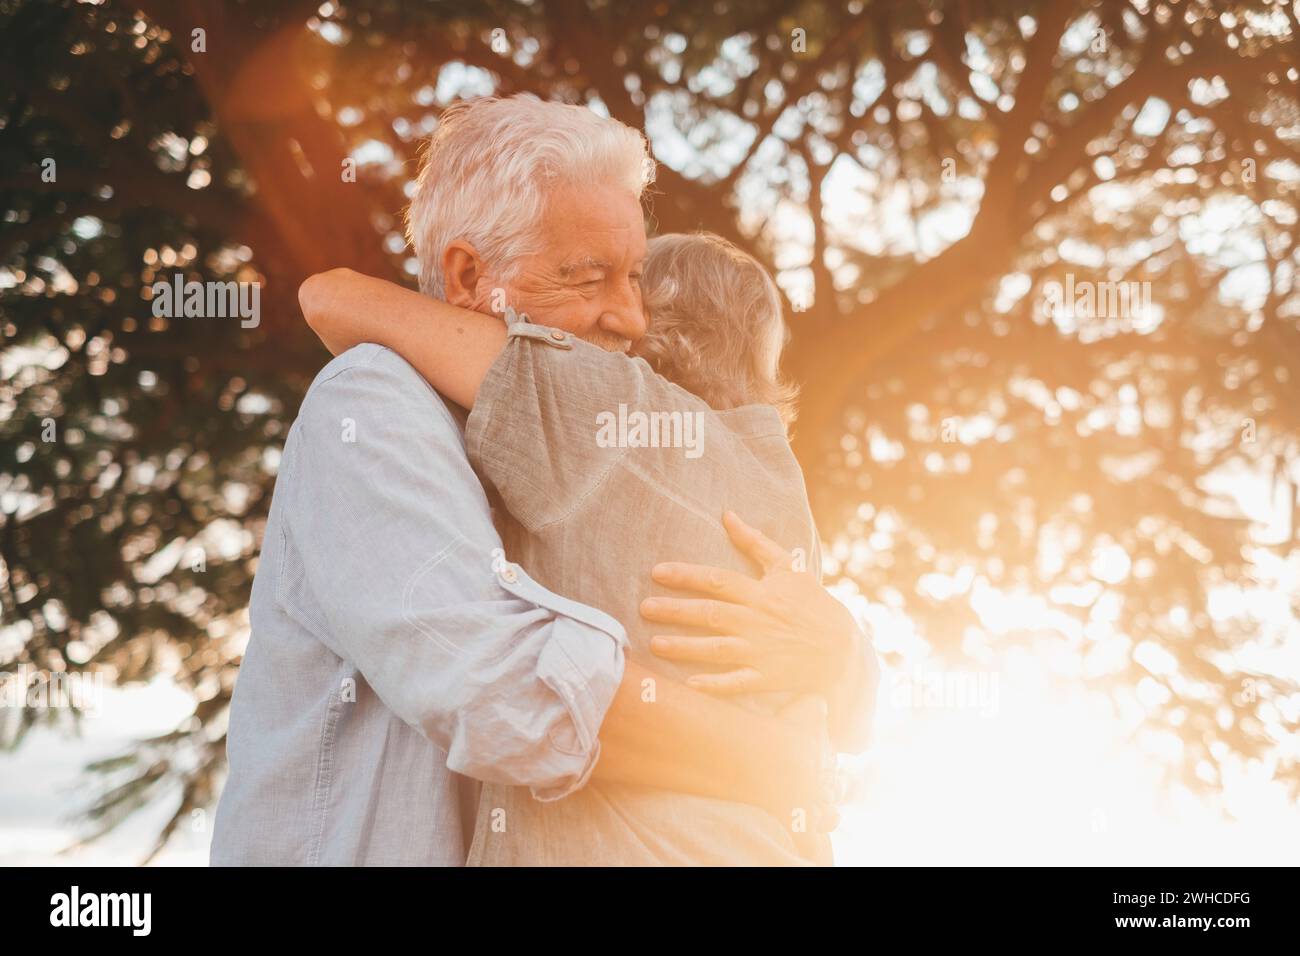 Head shot close up portrait happy grey haired middle aged woman snuggling to smiling older husband, enjoying tender moment at park. Bonding loving old family couple embracing, feeling happiness. Stock Photo